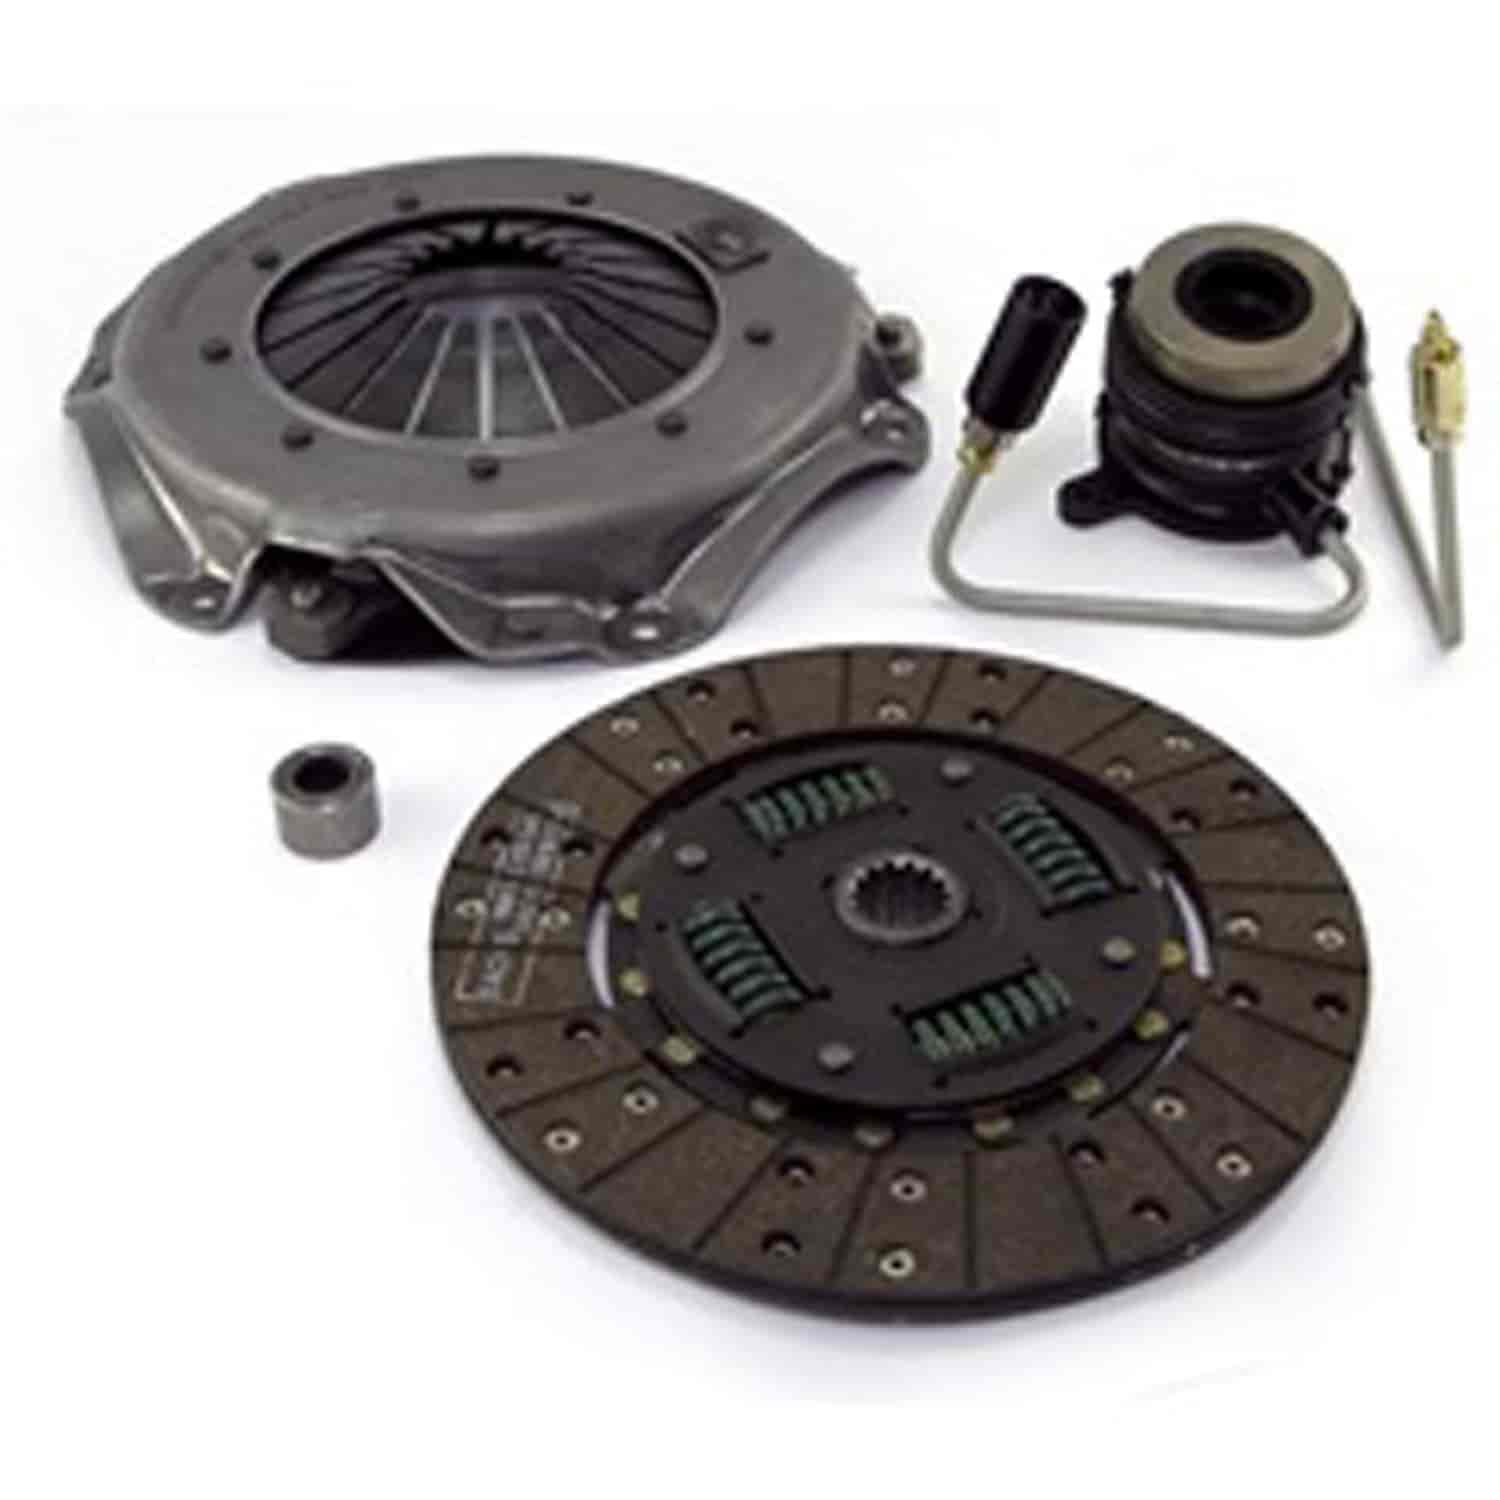 Master Clutch Kit 87-90 Cherokee/Wranglers 2.5L. Master kit includes the pressure plate clutch disc